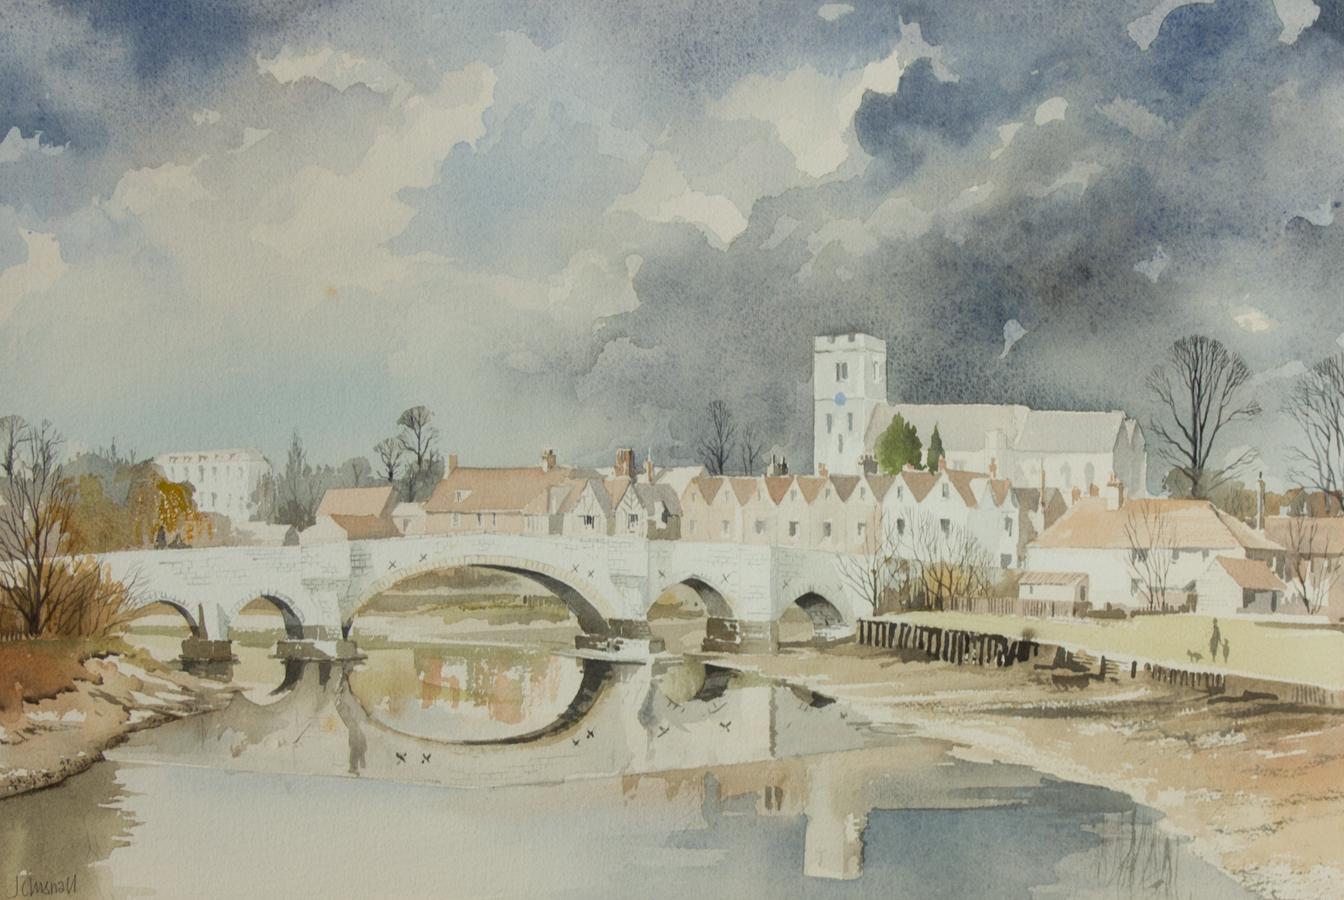 A charming 20th Century watercolour by the listed artist John Chisnall, depicting the tranquil river and architecture in Aylesford, Kent. The artist has balanced the composition with the delicate river in the foreground, the terraced houses